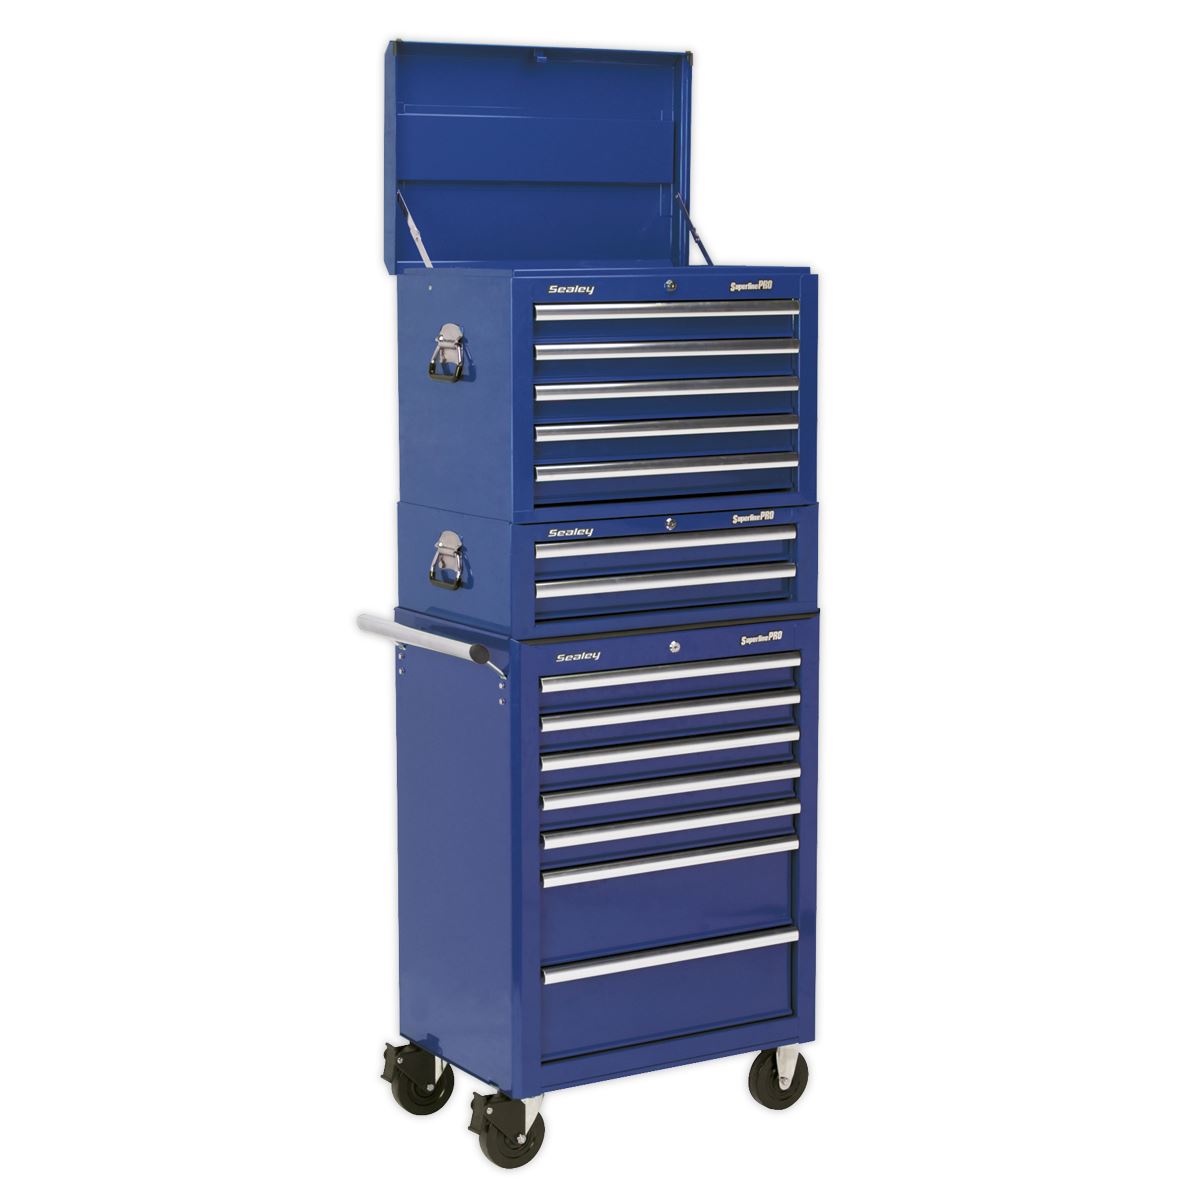 Sealey Superline Pro Topchest, Mid-Box Tool Chest & Rollcab Combination 14 Drawer with Ball-Bearing Slides - Blue